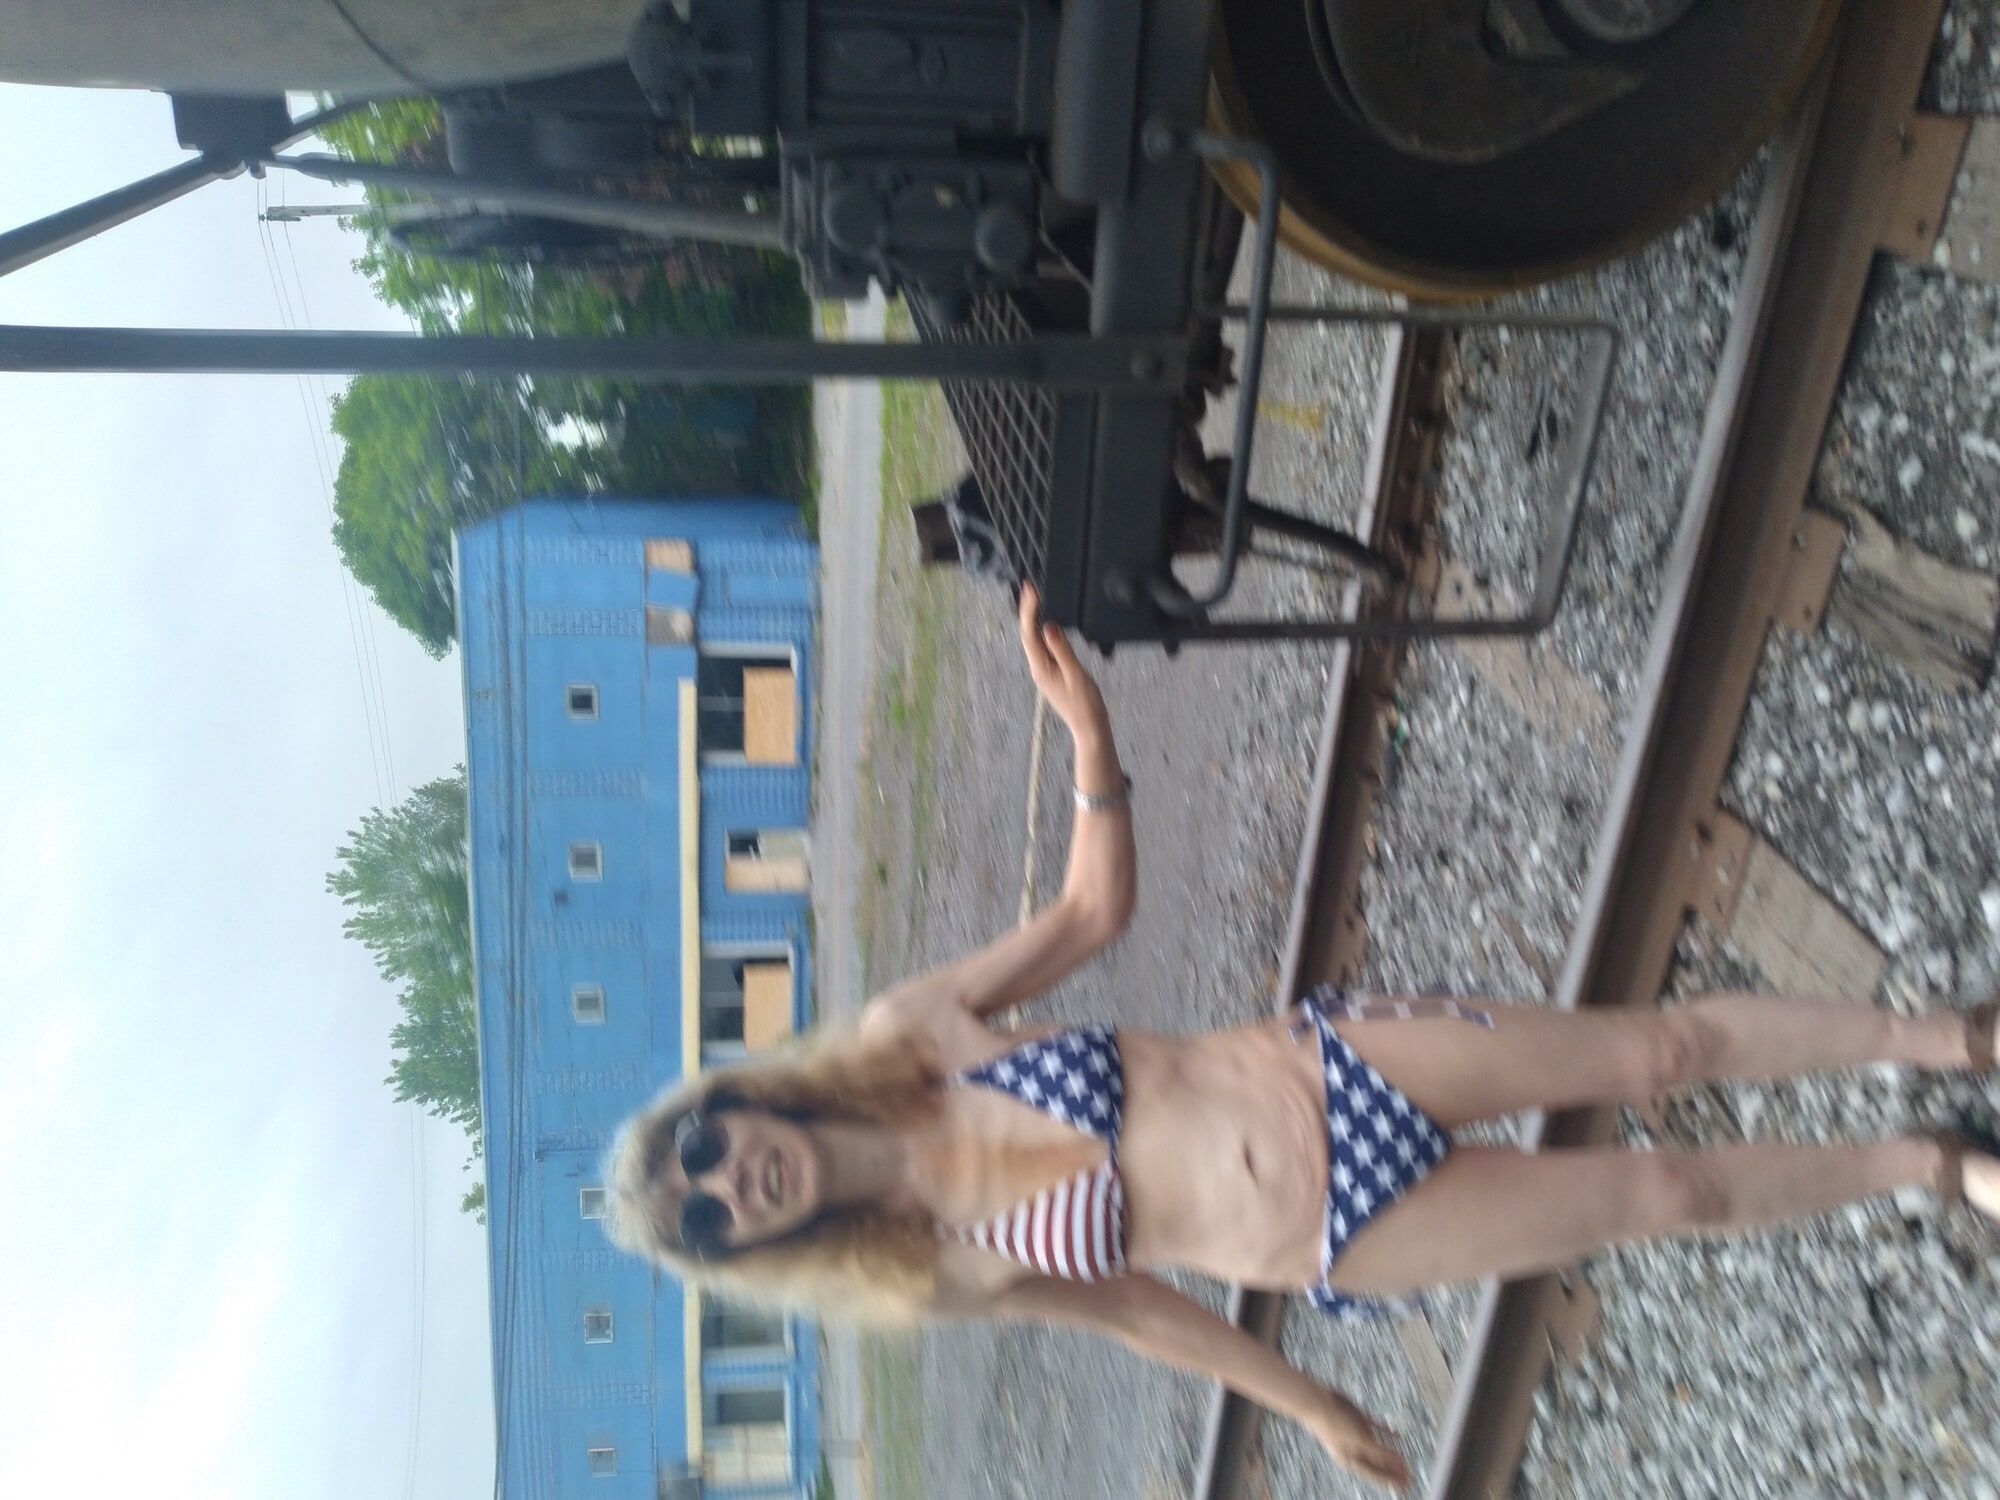 American Train. July 4th release. My best photo set to date. #8